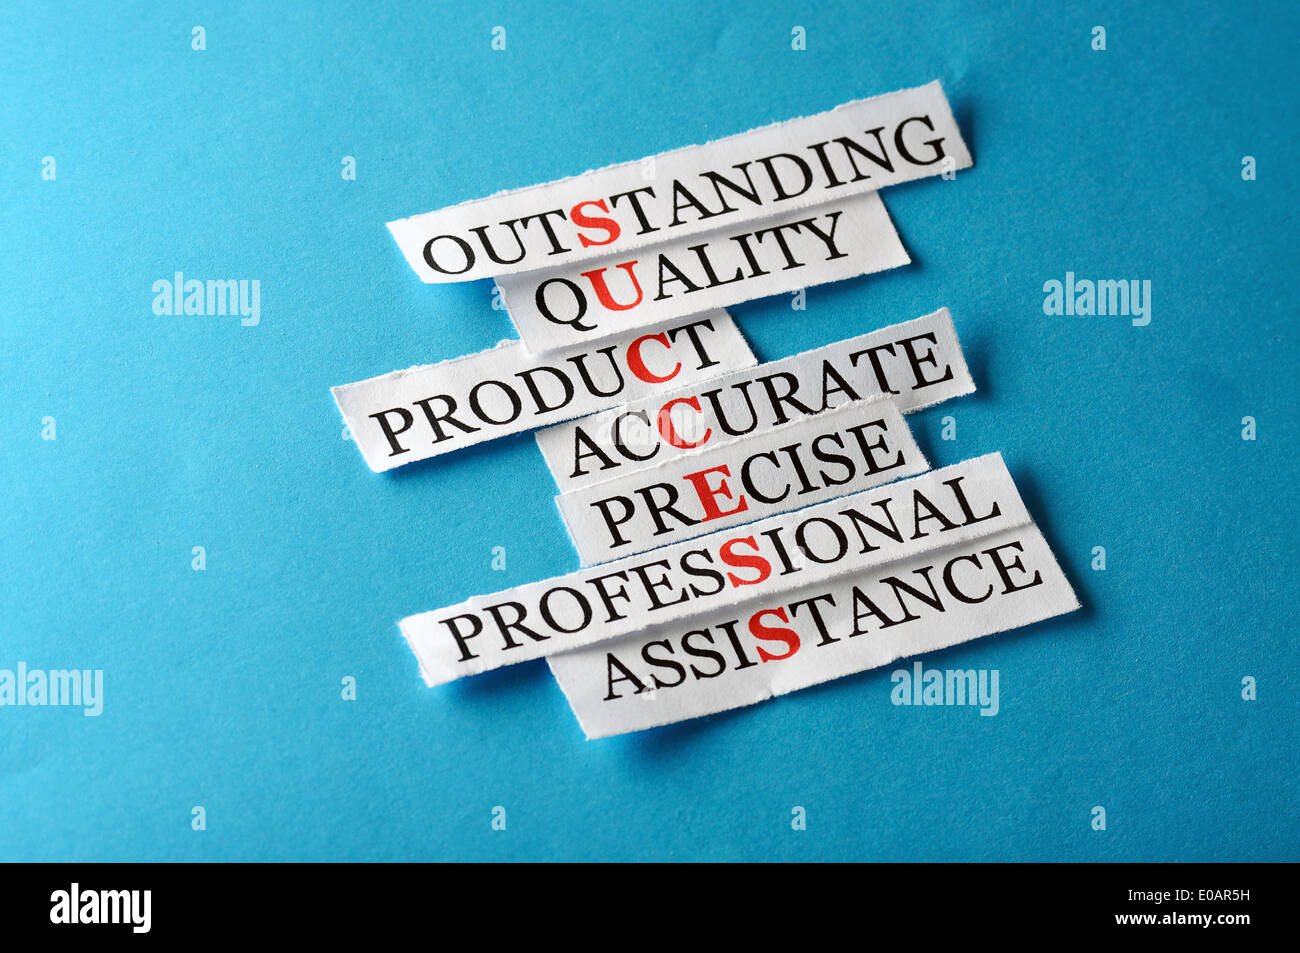 Success acronym in business concept, words on cut paper hard light  Stock Photo